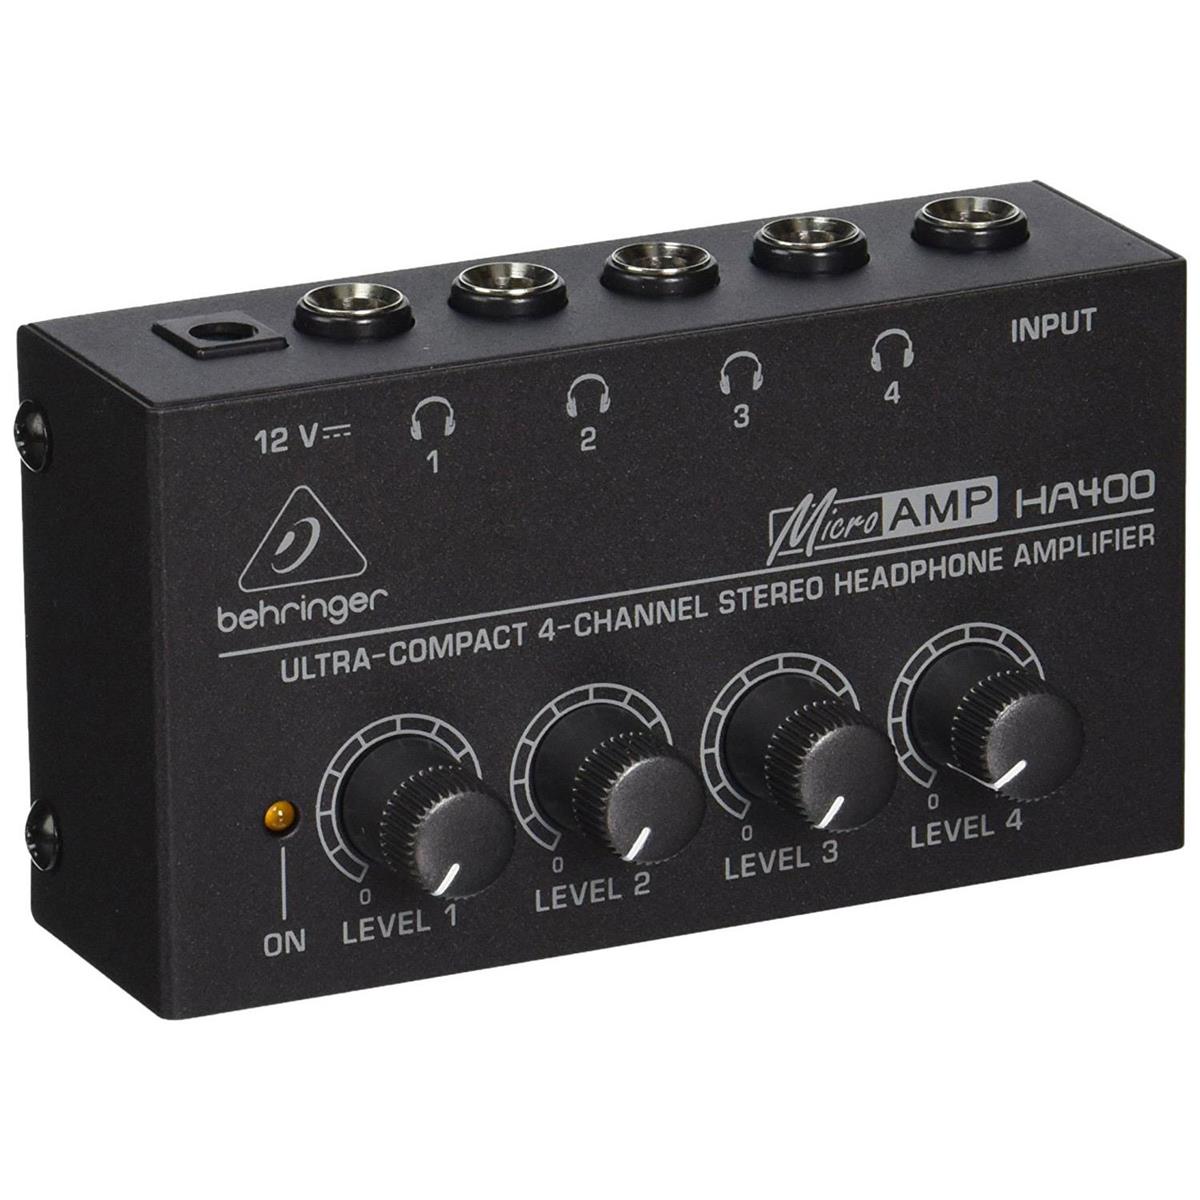 Behringer HA-400 Ultra Compact 4-Channel Stereo Headphone Amplifier -  000-38602-00010